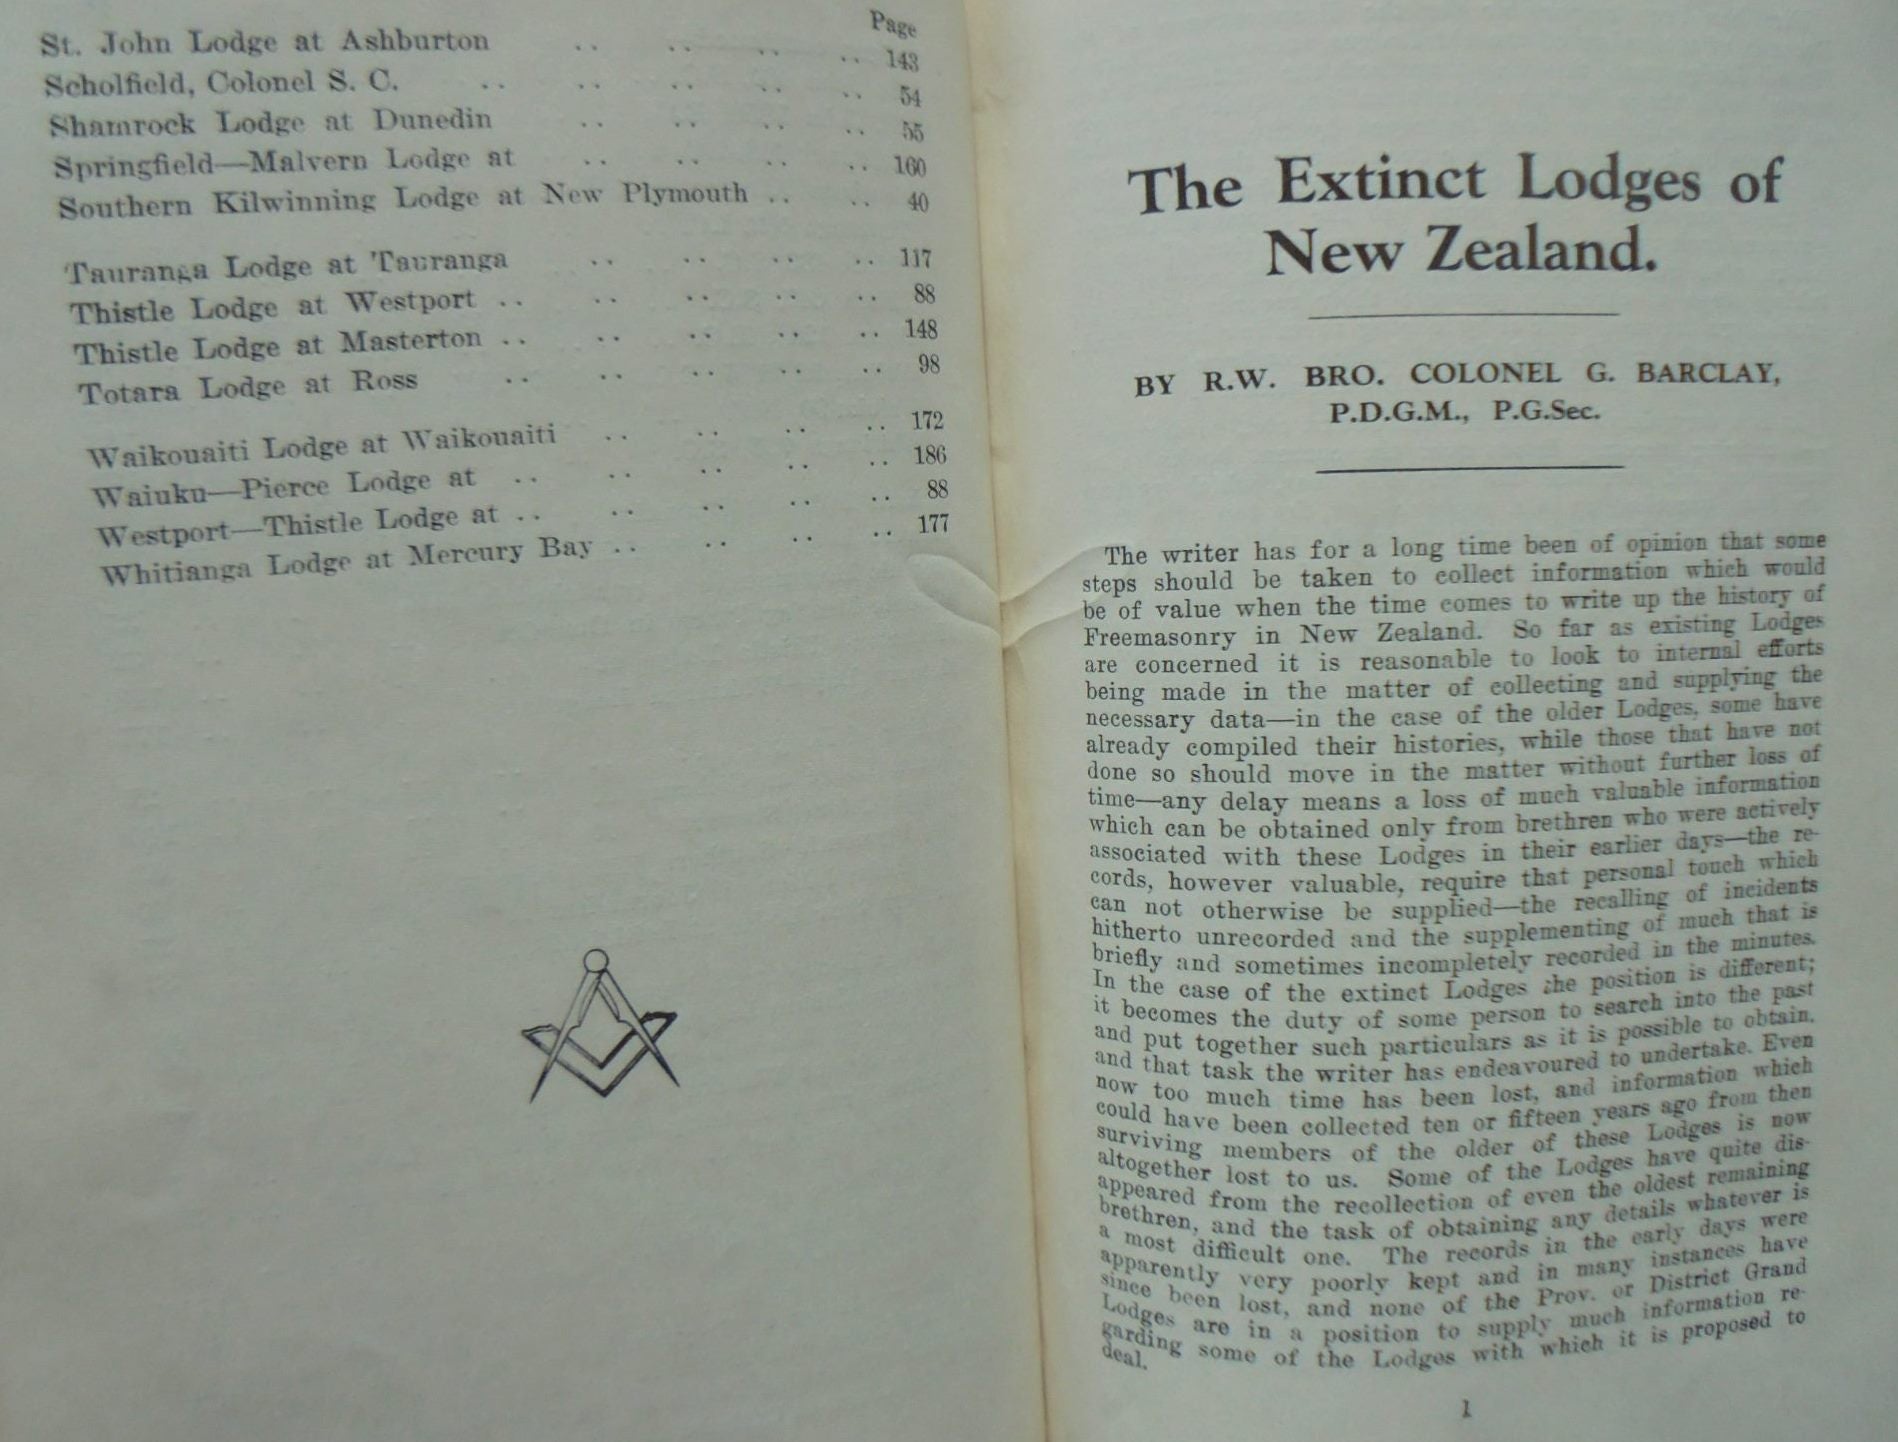 The Extinct Lodges of New Zealand By R. W. Bro. Colonel G. Barclay. SIGNED BY AUTHOR. Inscribed to previous owner.